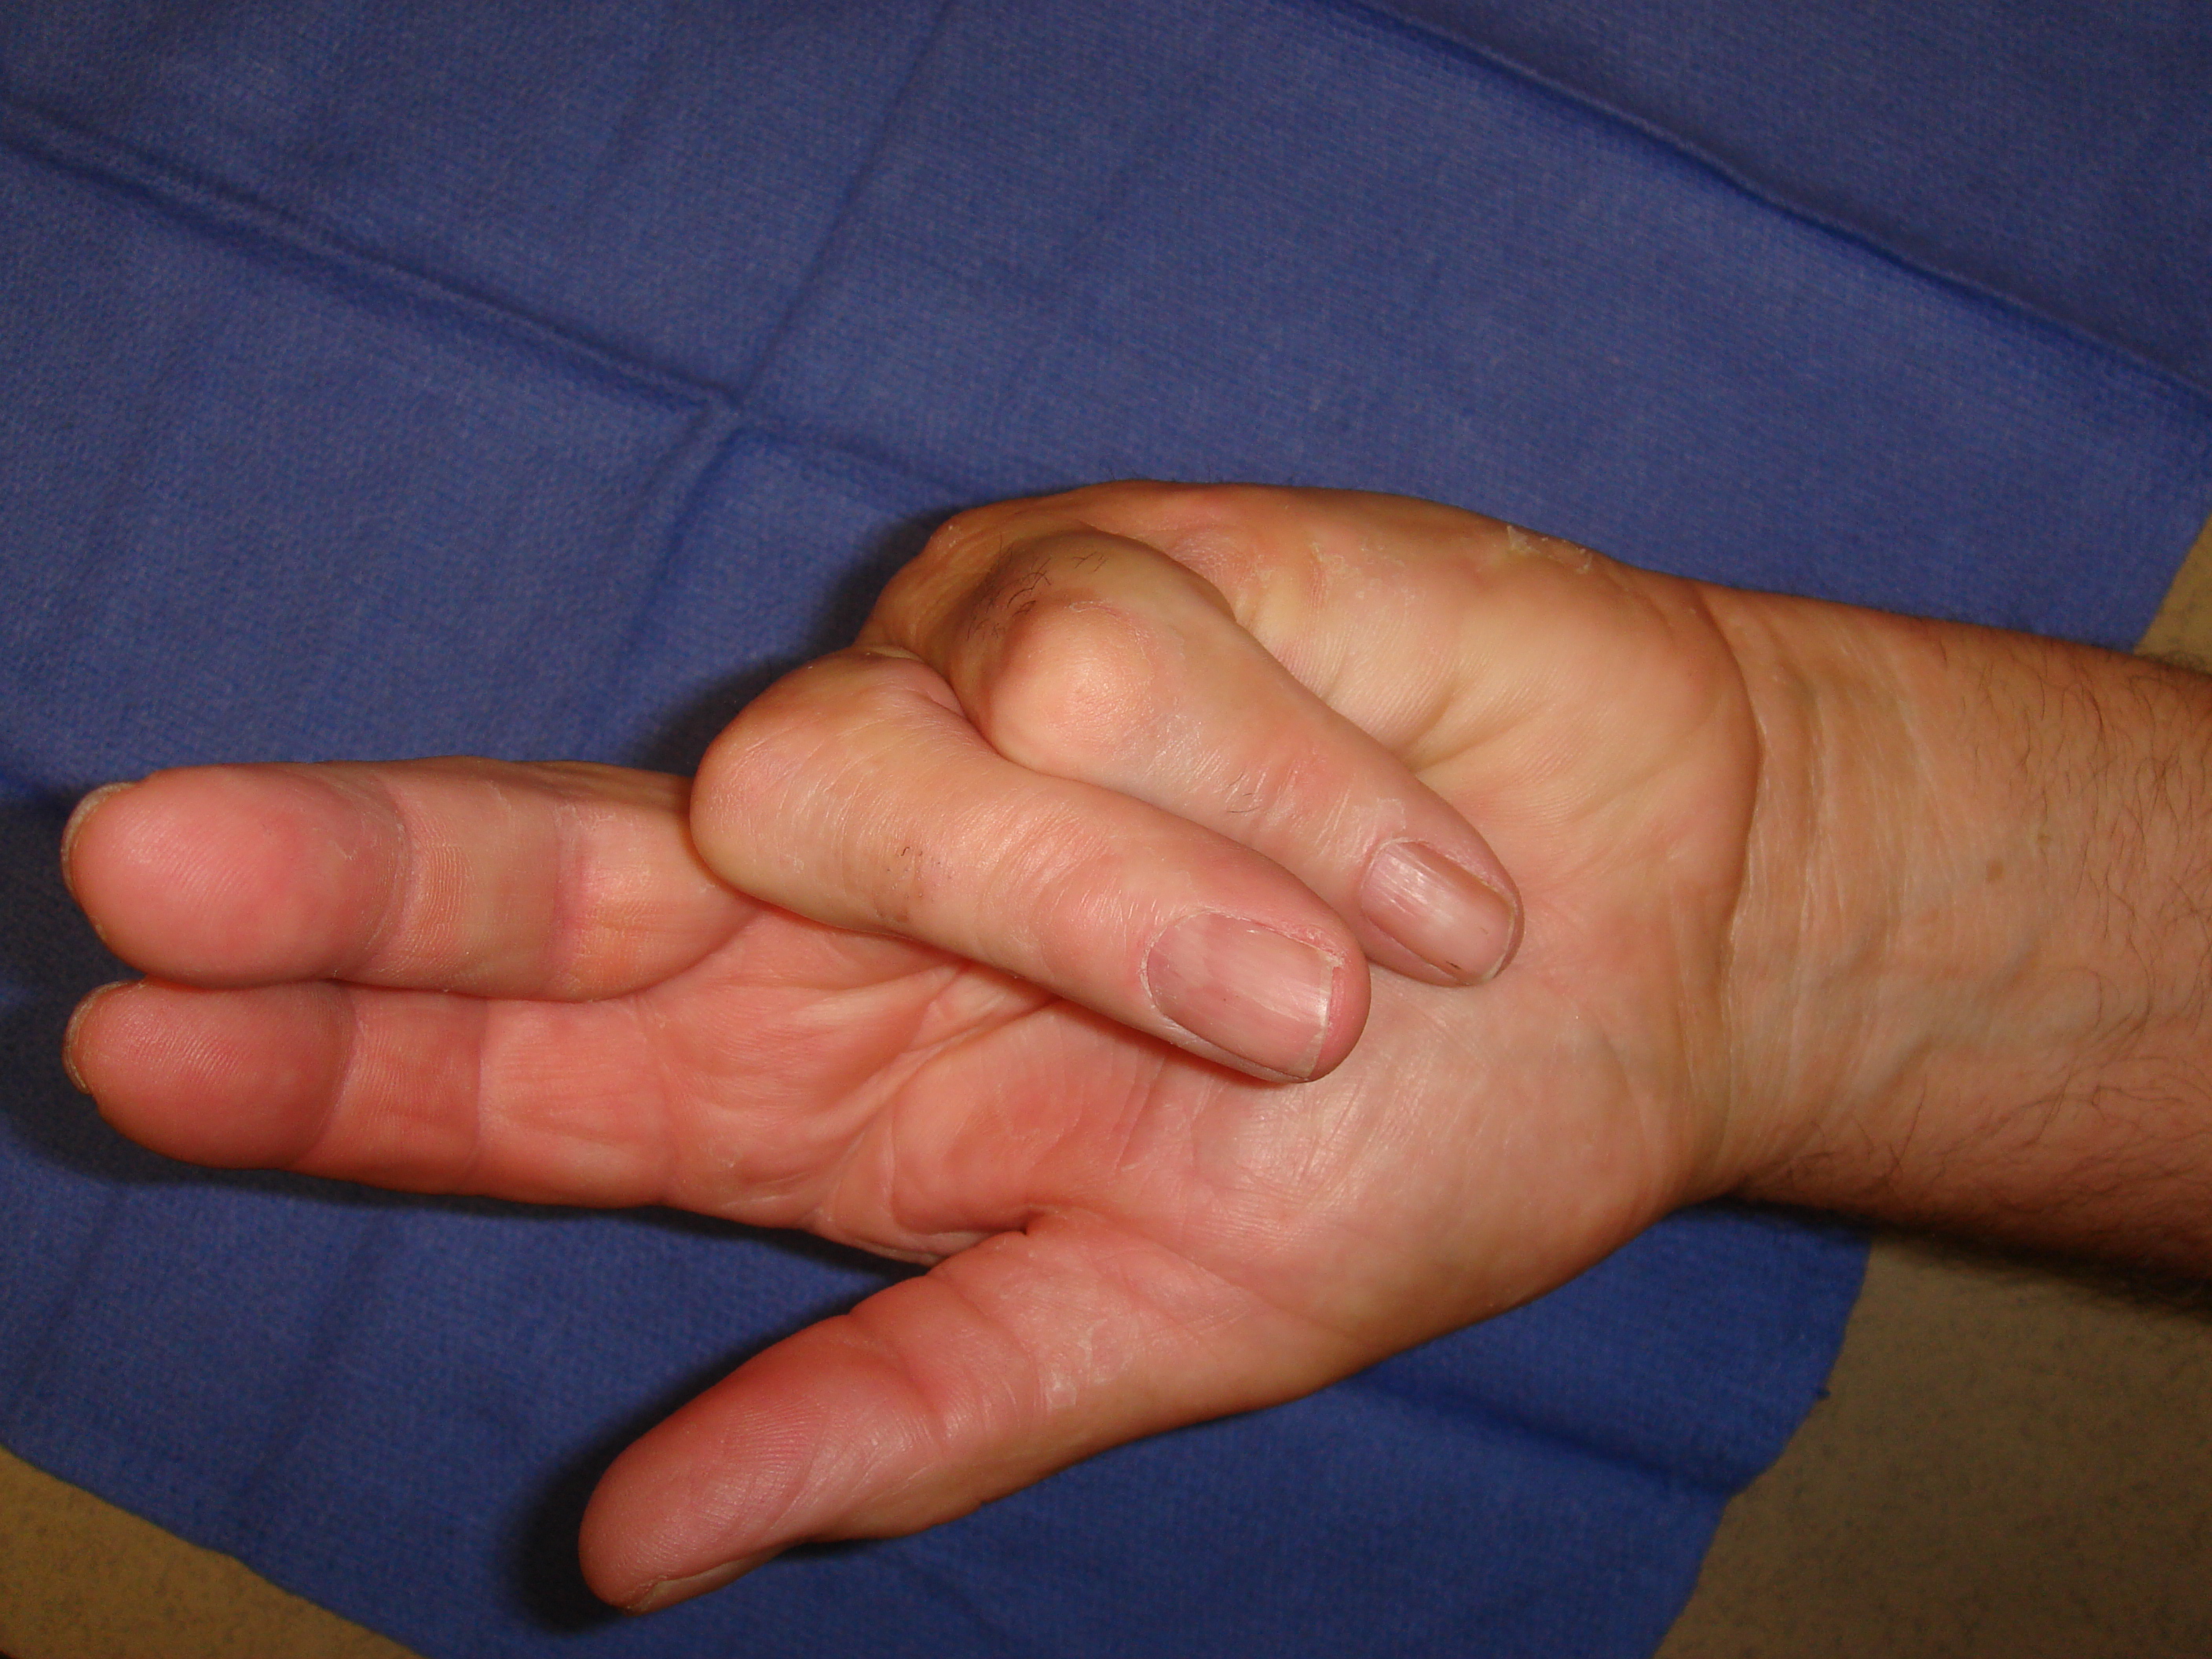 Figure 6b: This patient has advanced post-surgical recurrence of Dupuytren’s contracture affecting his left ring and little fingers. There is very limited active and passive ROM. The patient refused to have surgery again, despite dysfunction, but sought collagenase on the advice of a friend who was treated with CCH. Identifiable, palpable cords are present in addition to scar tissue; ultimately, more than 1 treatment cycle was going to be required; treatment started with the little finger.